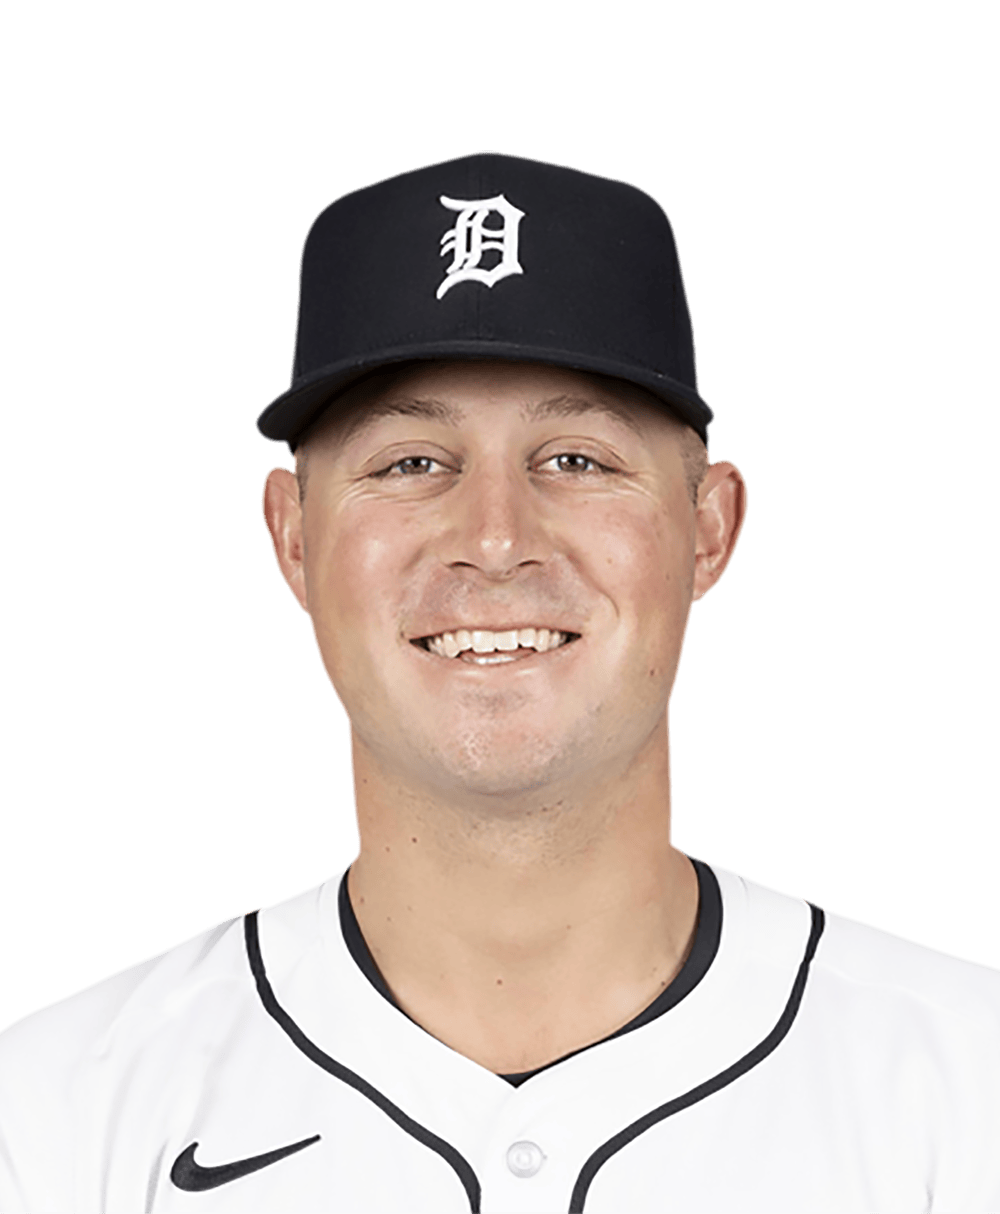 Spencer Torkelson (2 HRs) powers Tigers past Yankees